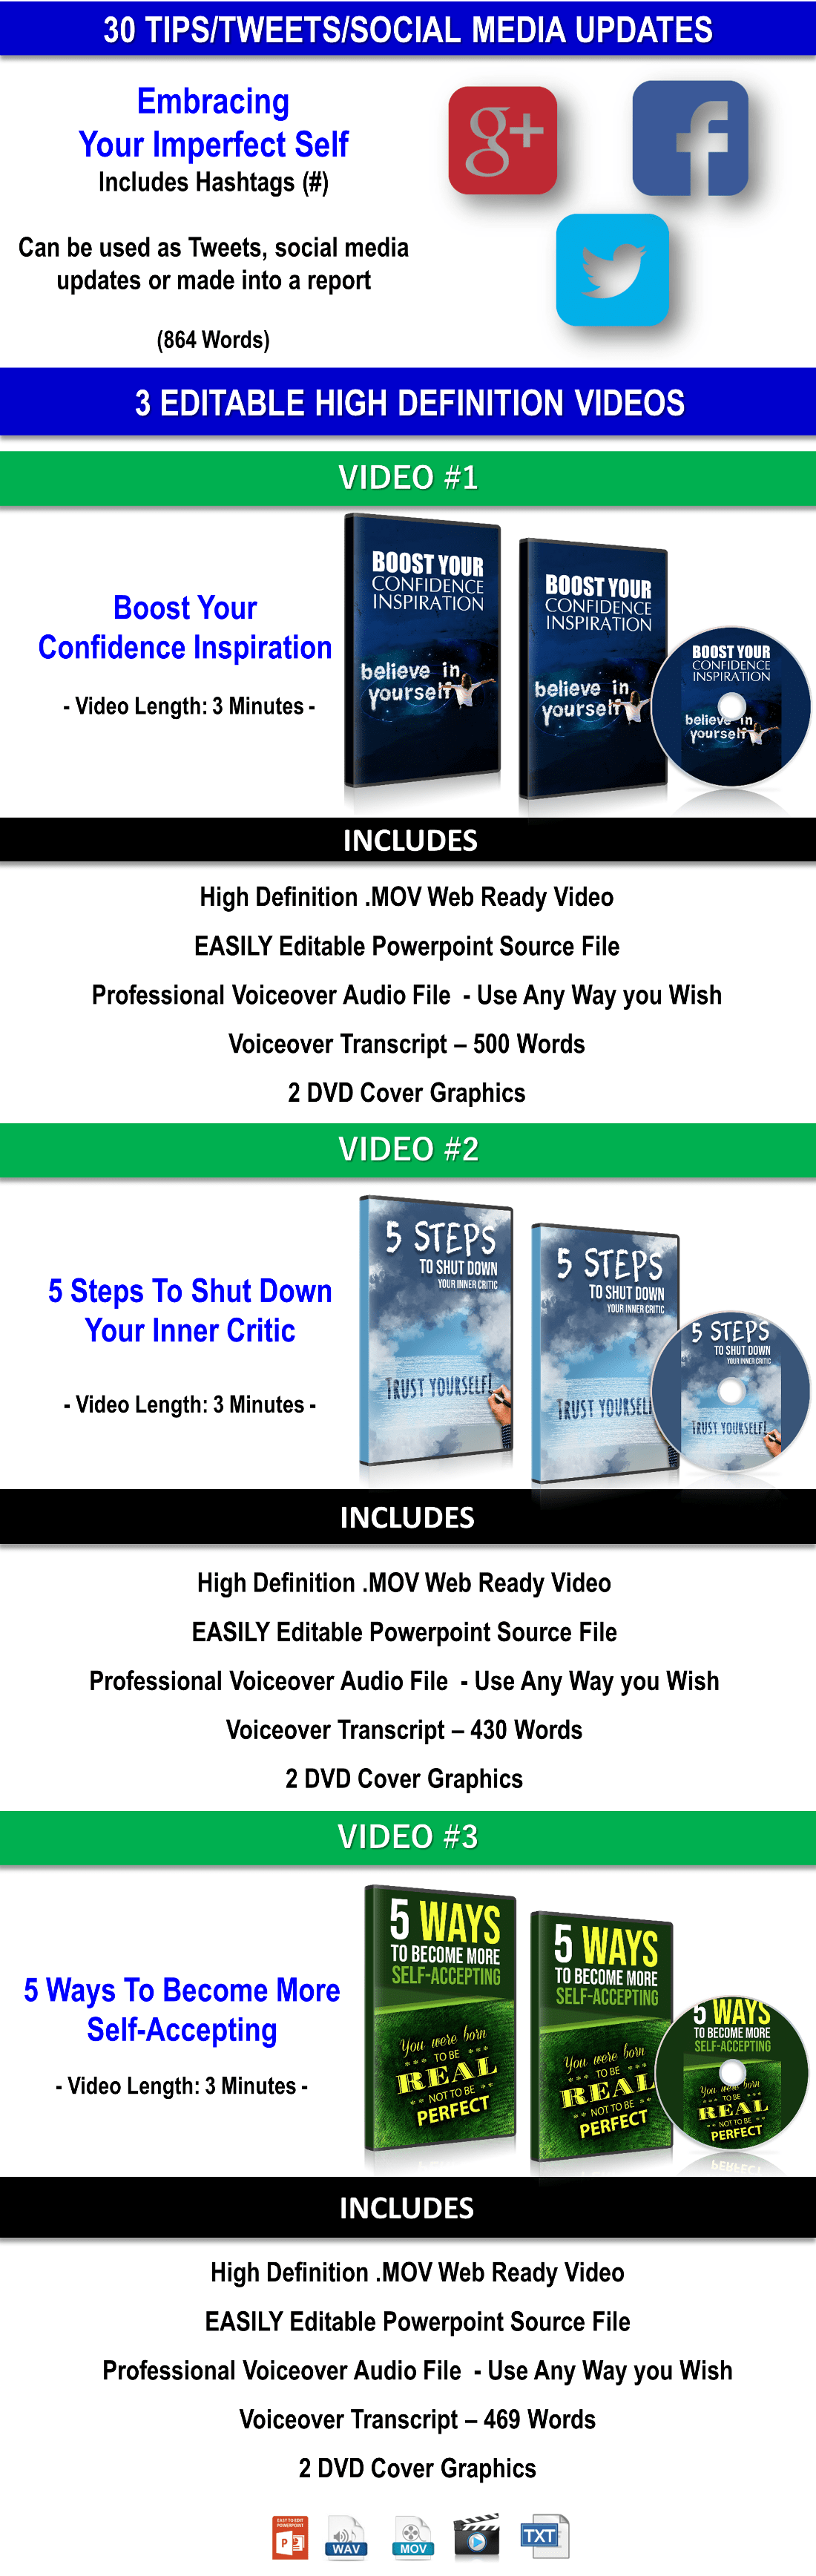 8 Lesson eCourse - 7 Acceptance Strategies - A Blueprint For Personal Transformation And Your Best Tomorrows Giant Content Pack with PLR Rights